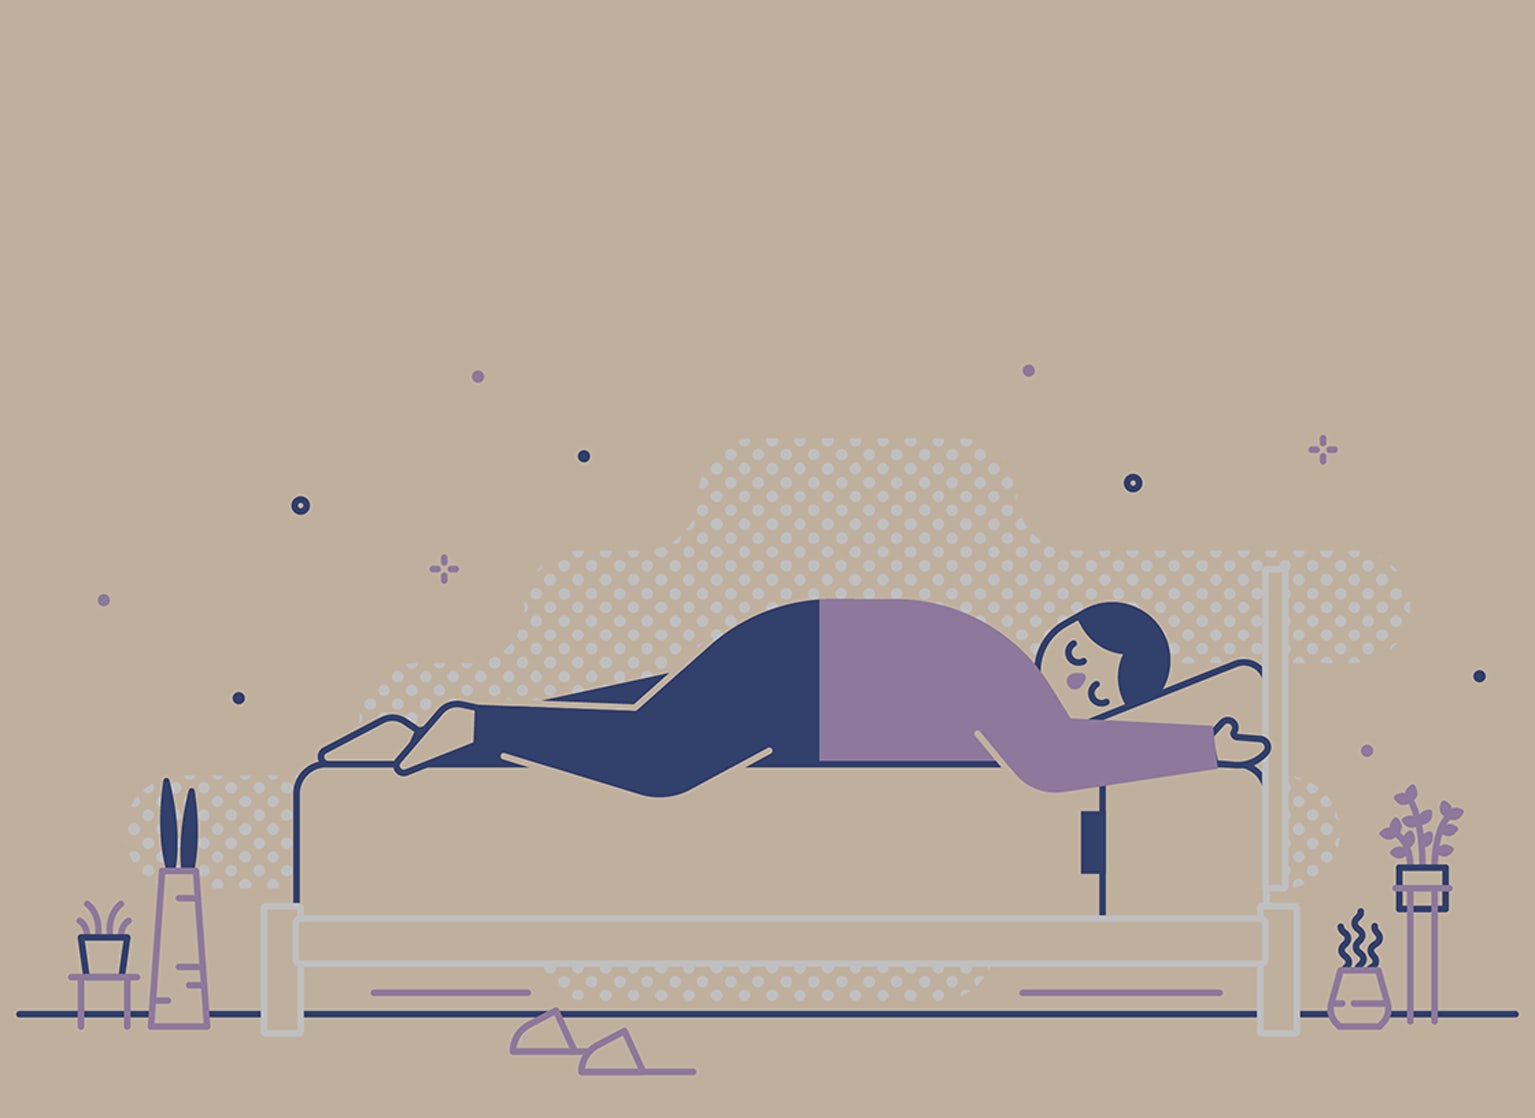 Yoga Exercises Poses To Do Before Bed for Better Sleep